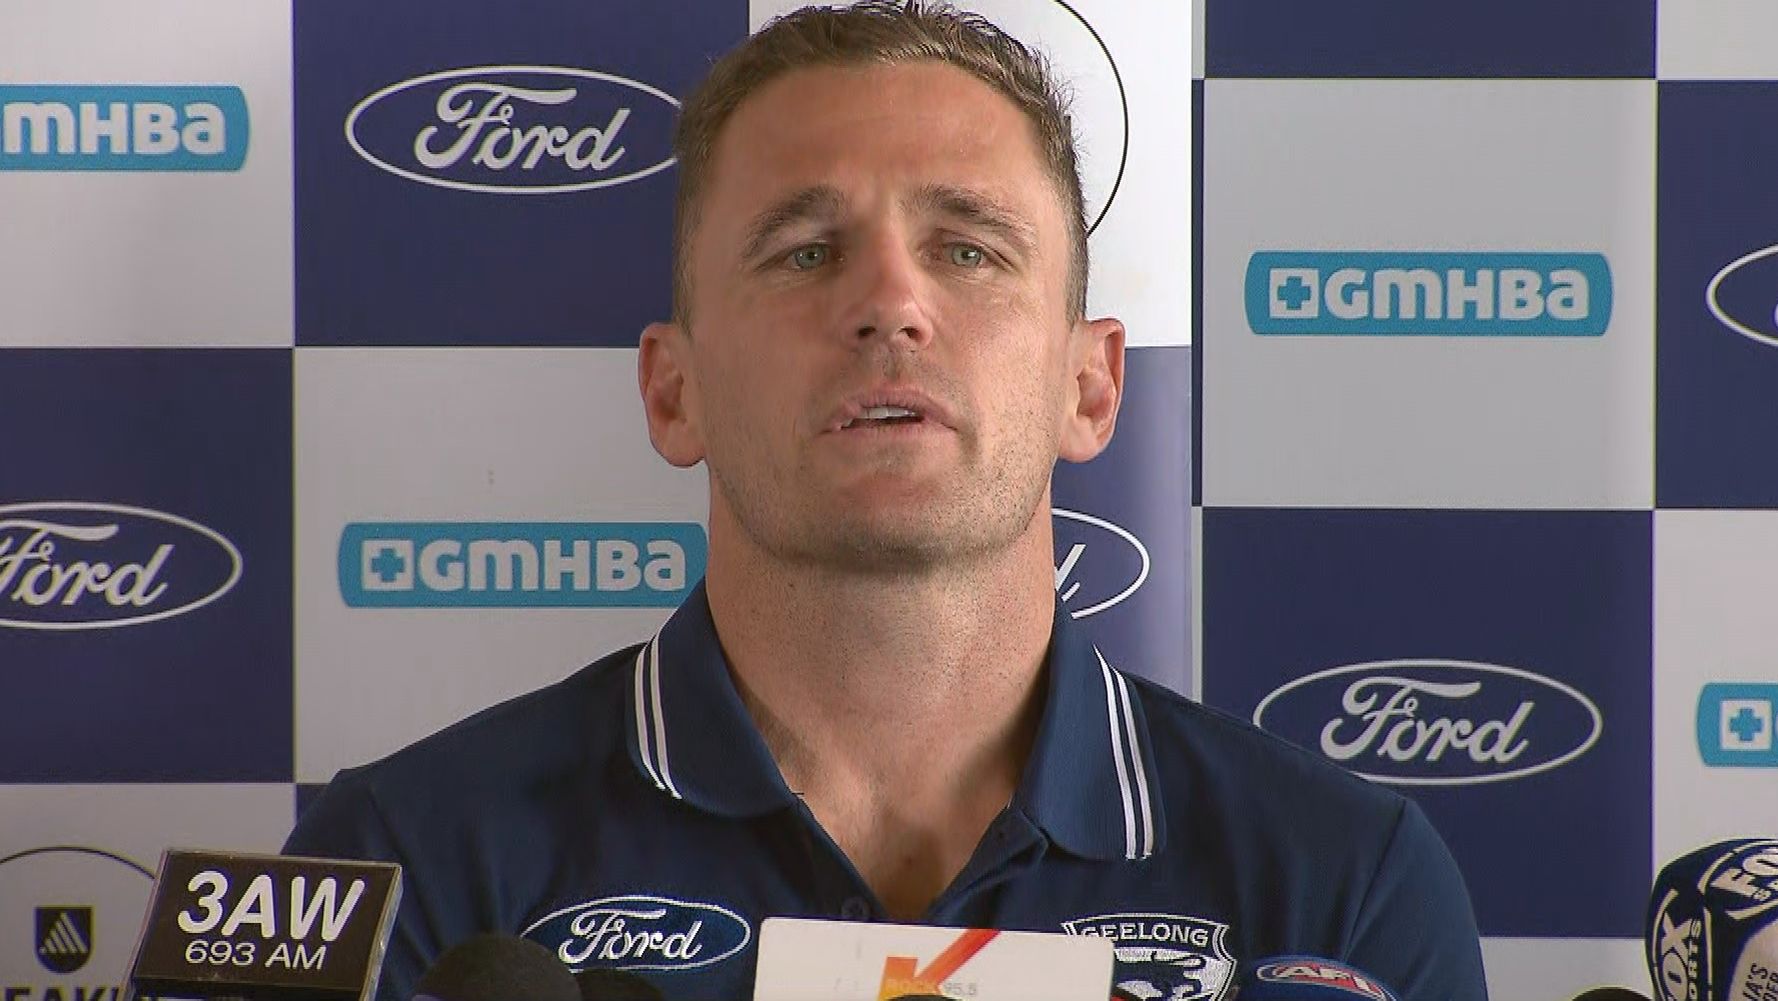 Geelong Cats captain Joel Selwood announces his retirement from the AFL.